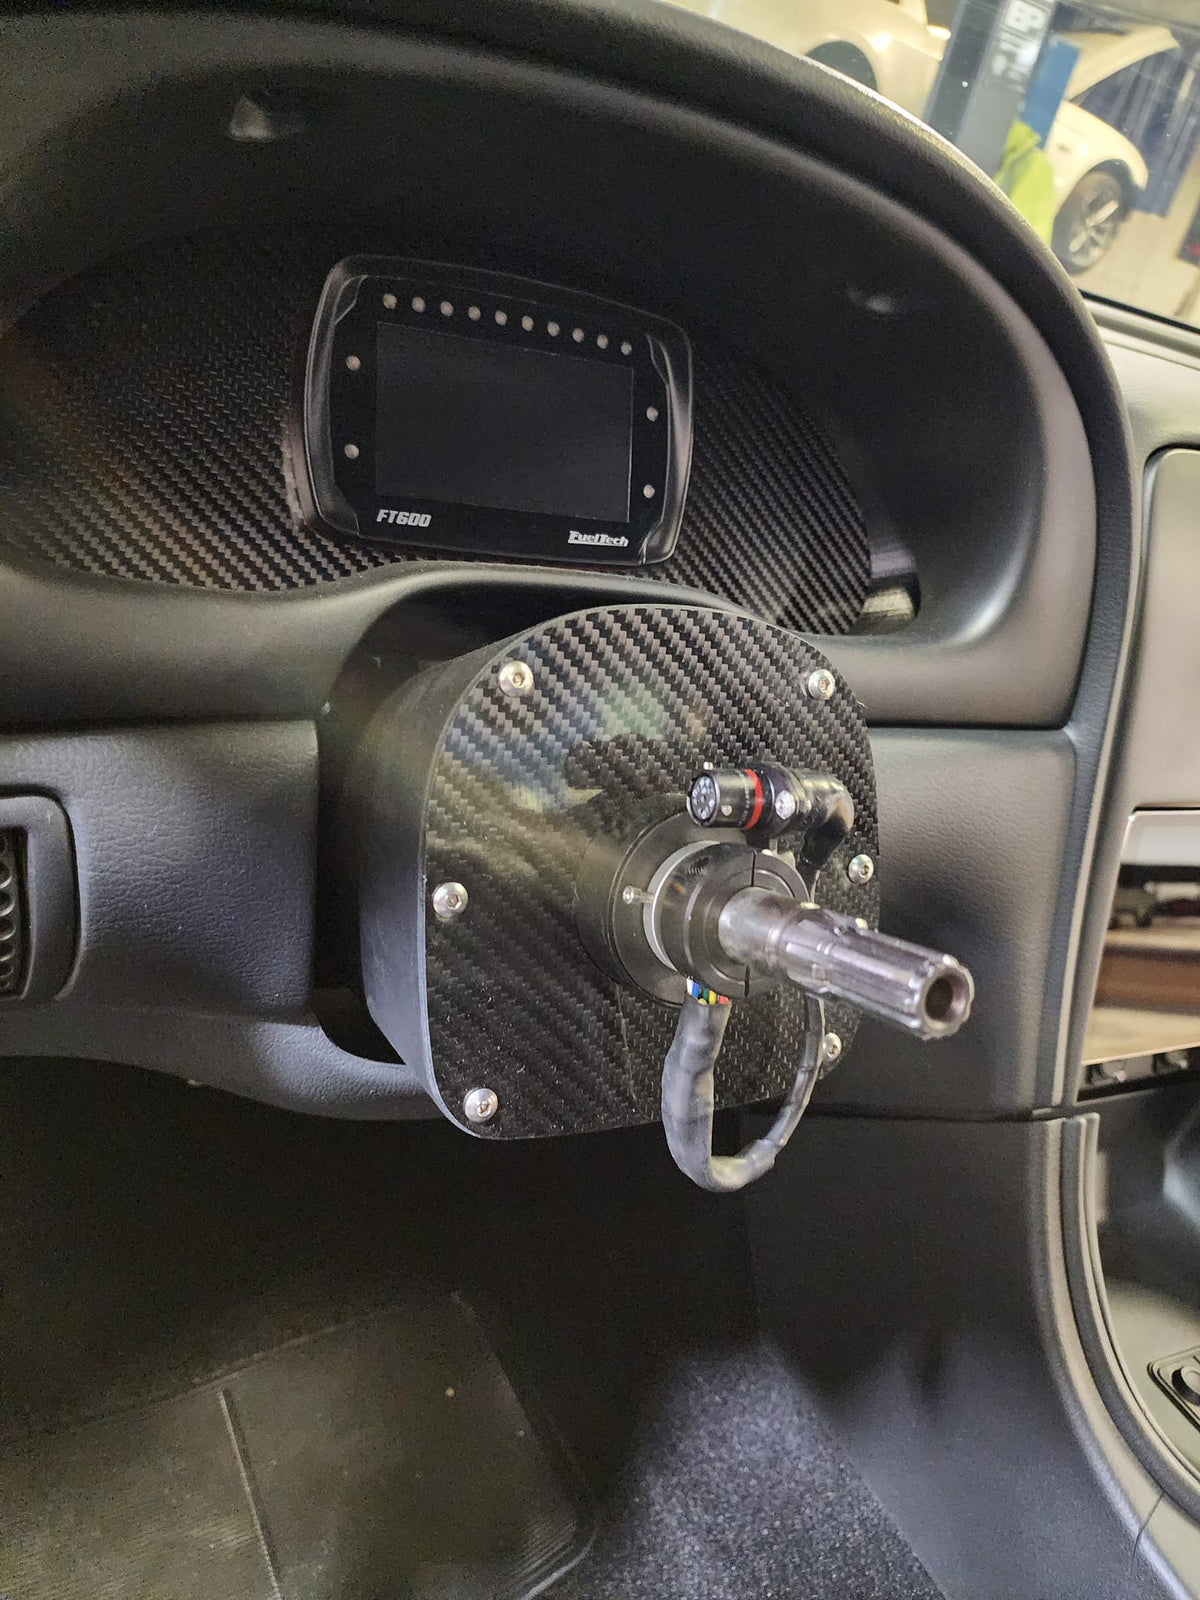 3D Printed column shrouds for Ford Mustang SN95 and New Edge (1994-2004) - CarChains3d